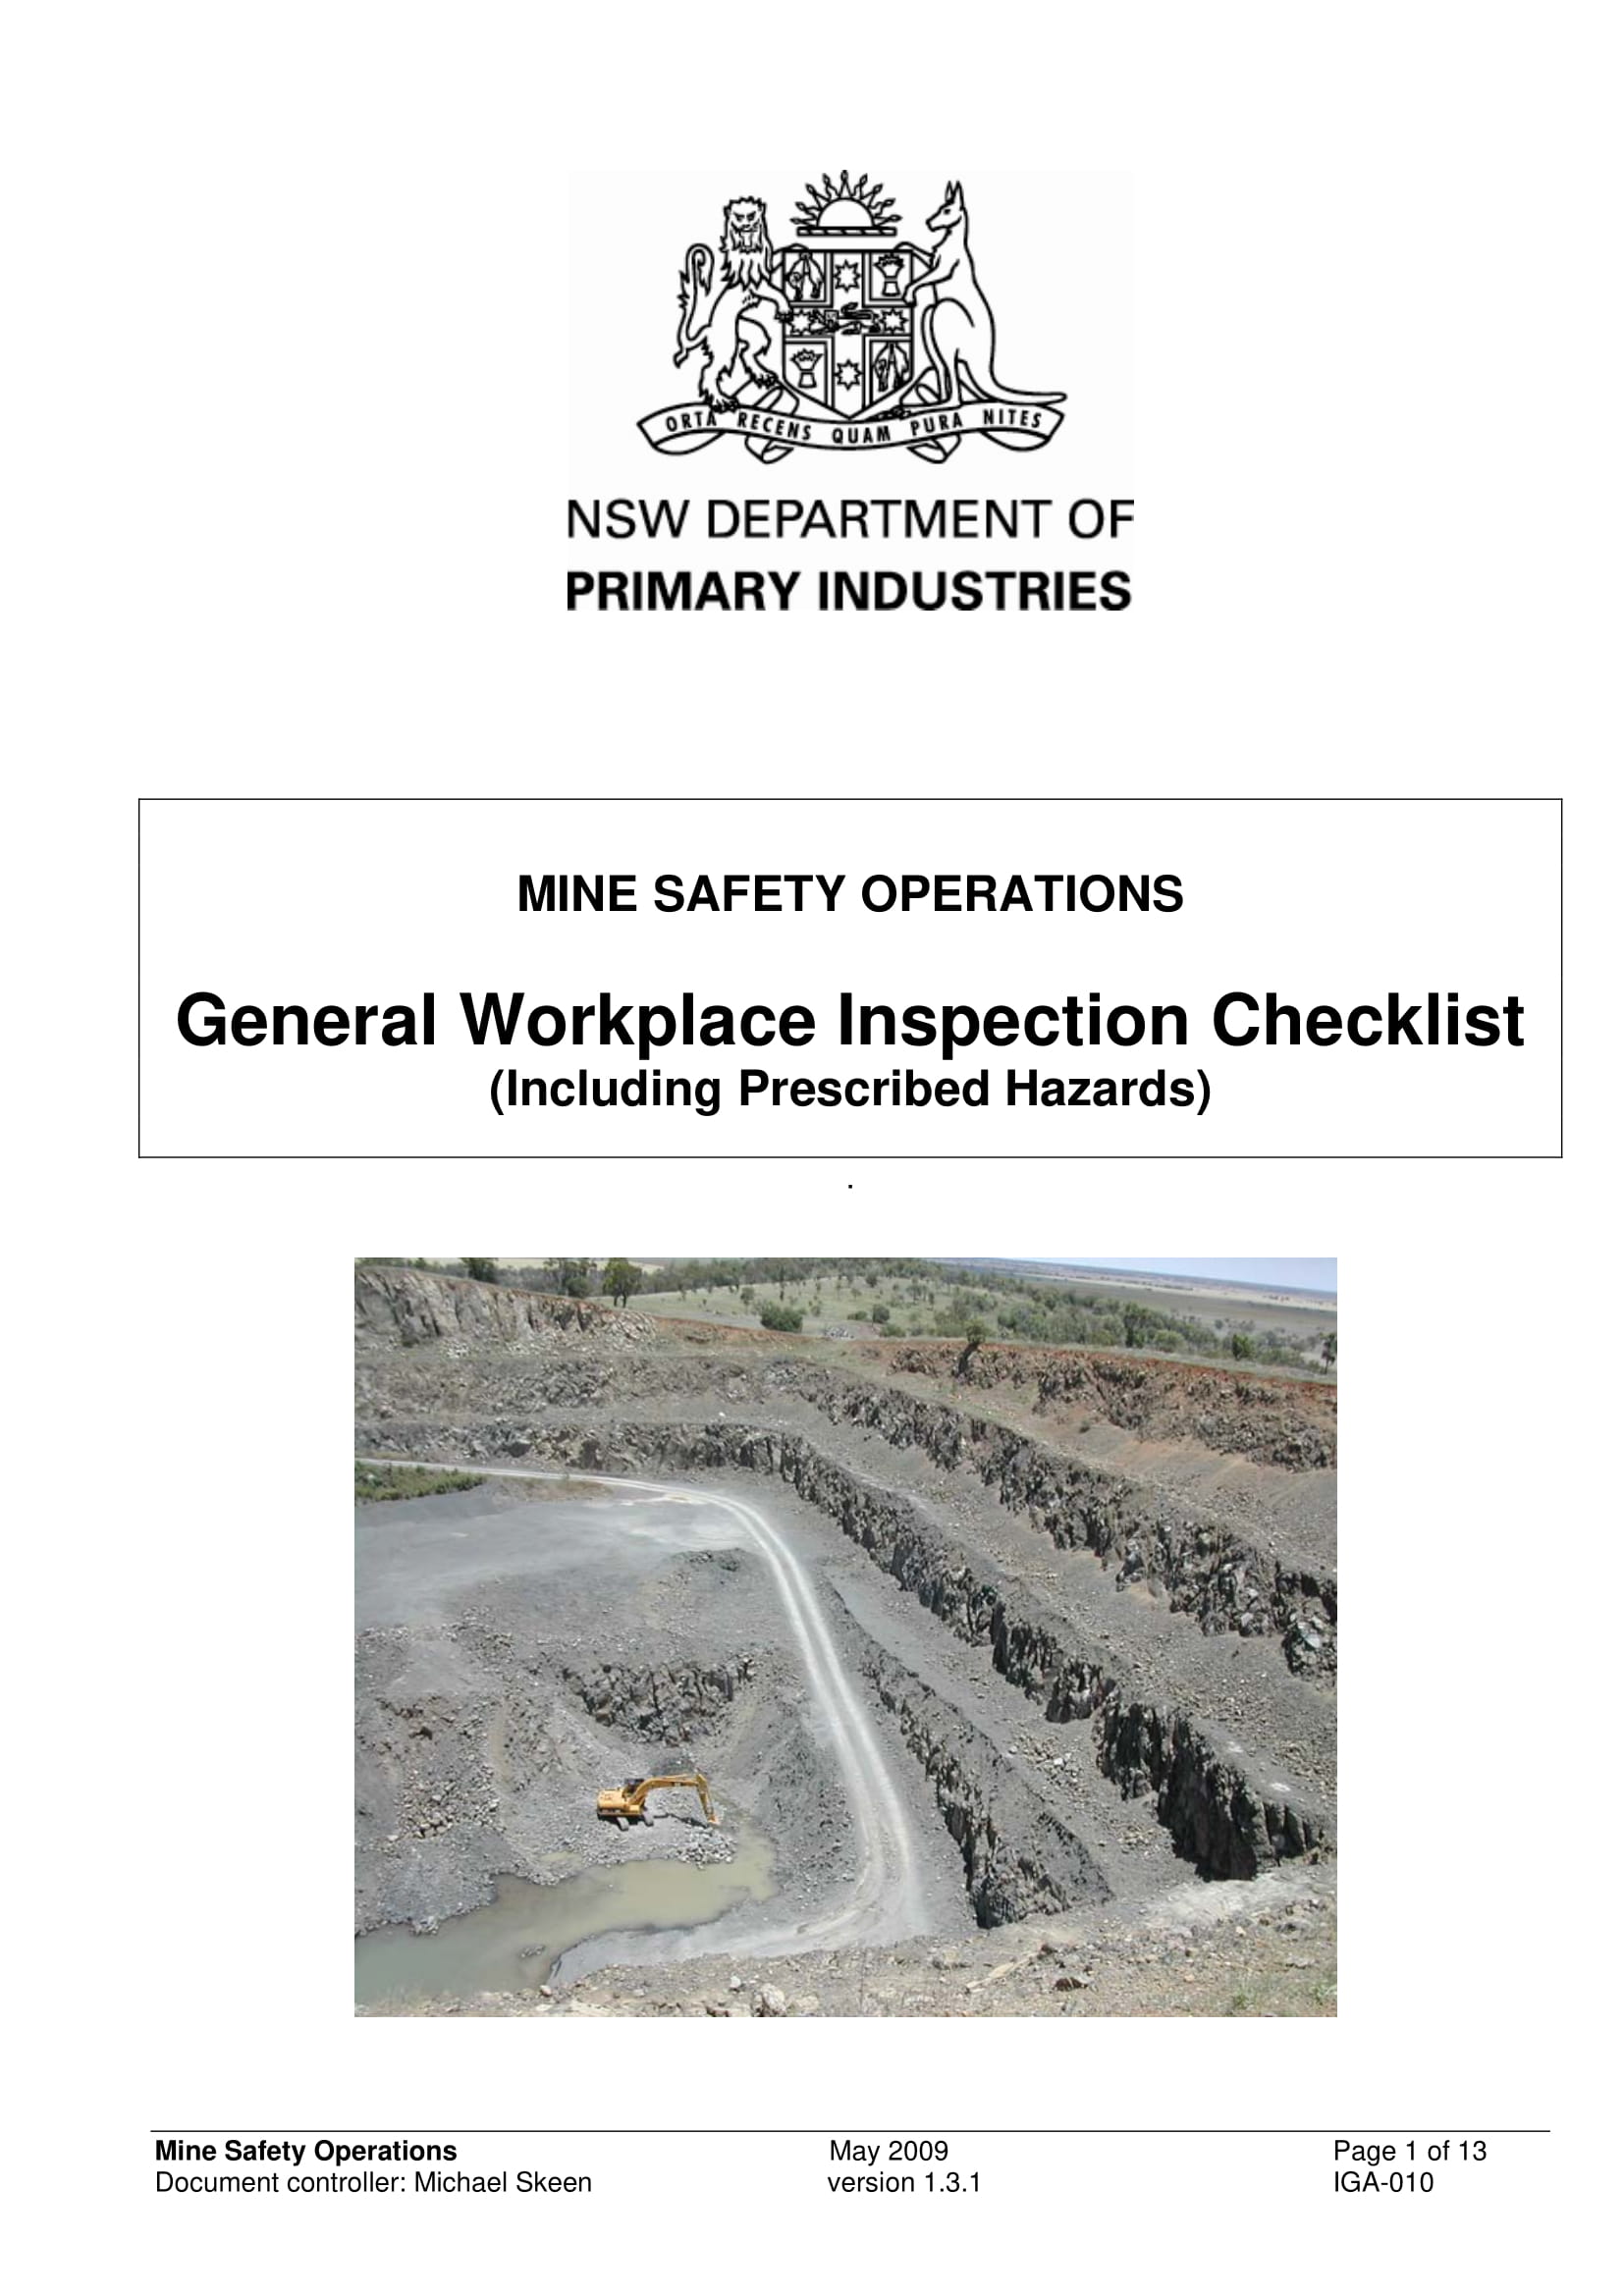 General Workplace Inspection Checklist Example